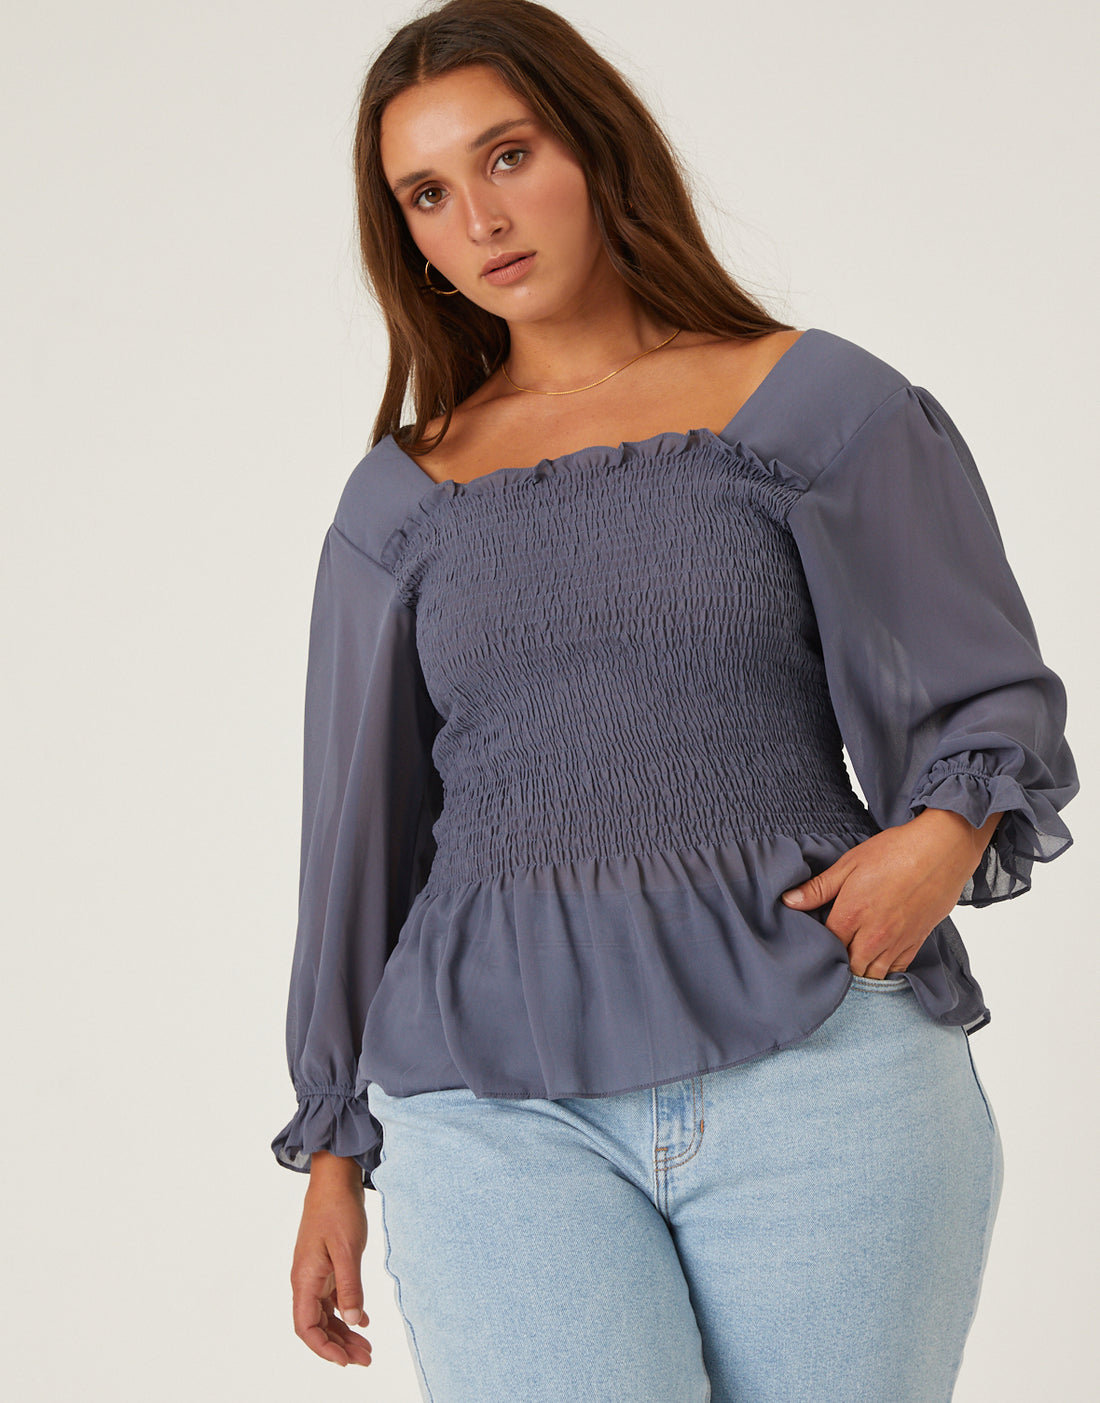 Curve Long Sleeve Smocked Top Plus Size Tops Blue 1XL -2020AVE